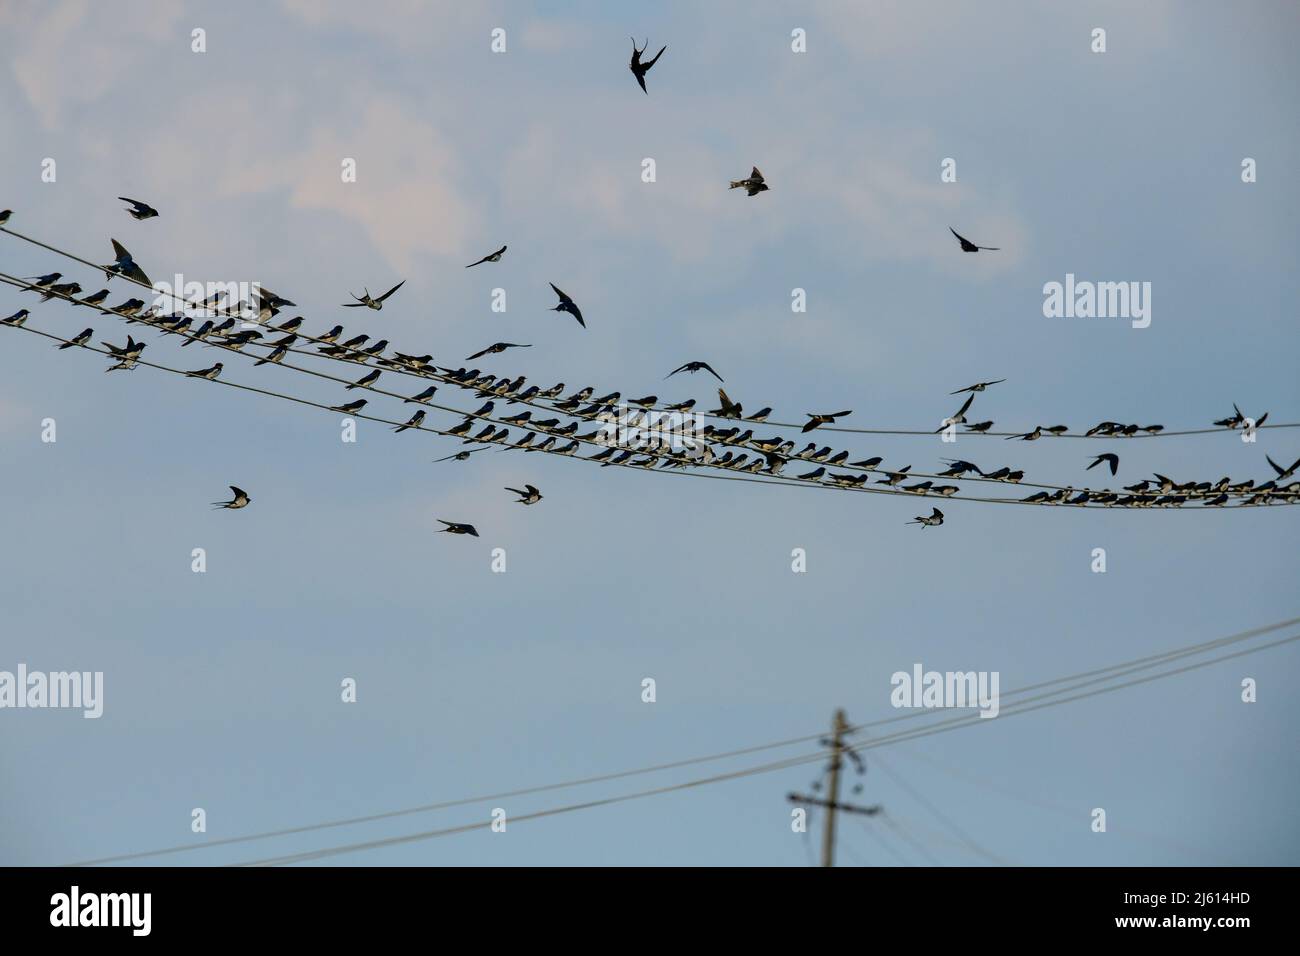 hundreds of Swift birds sitting in electric line Stock Photo